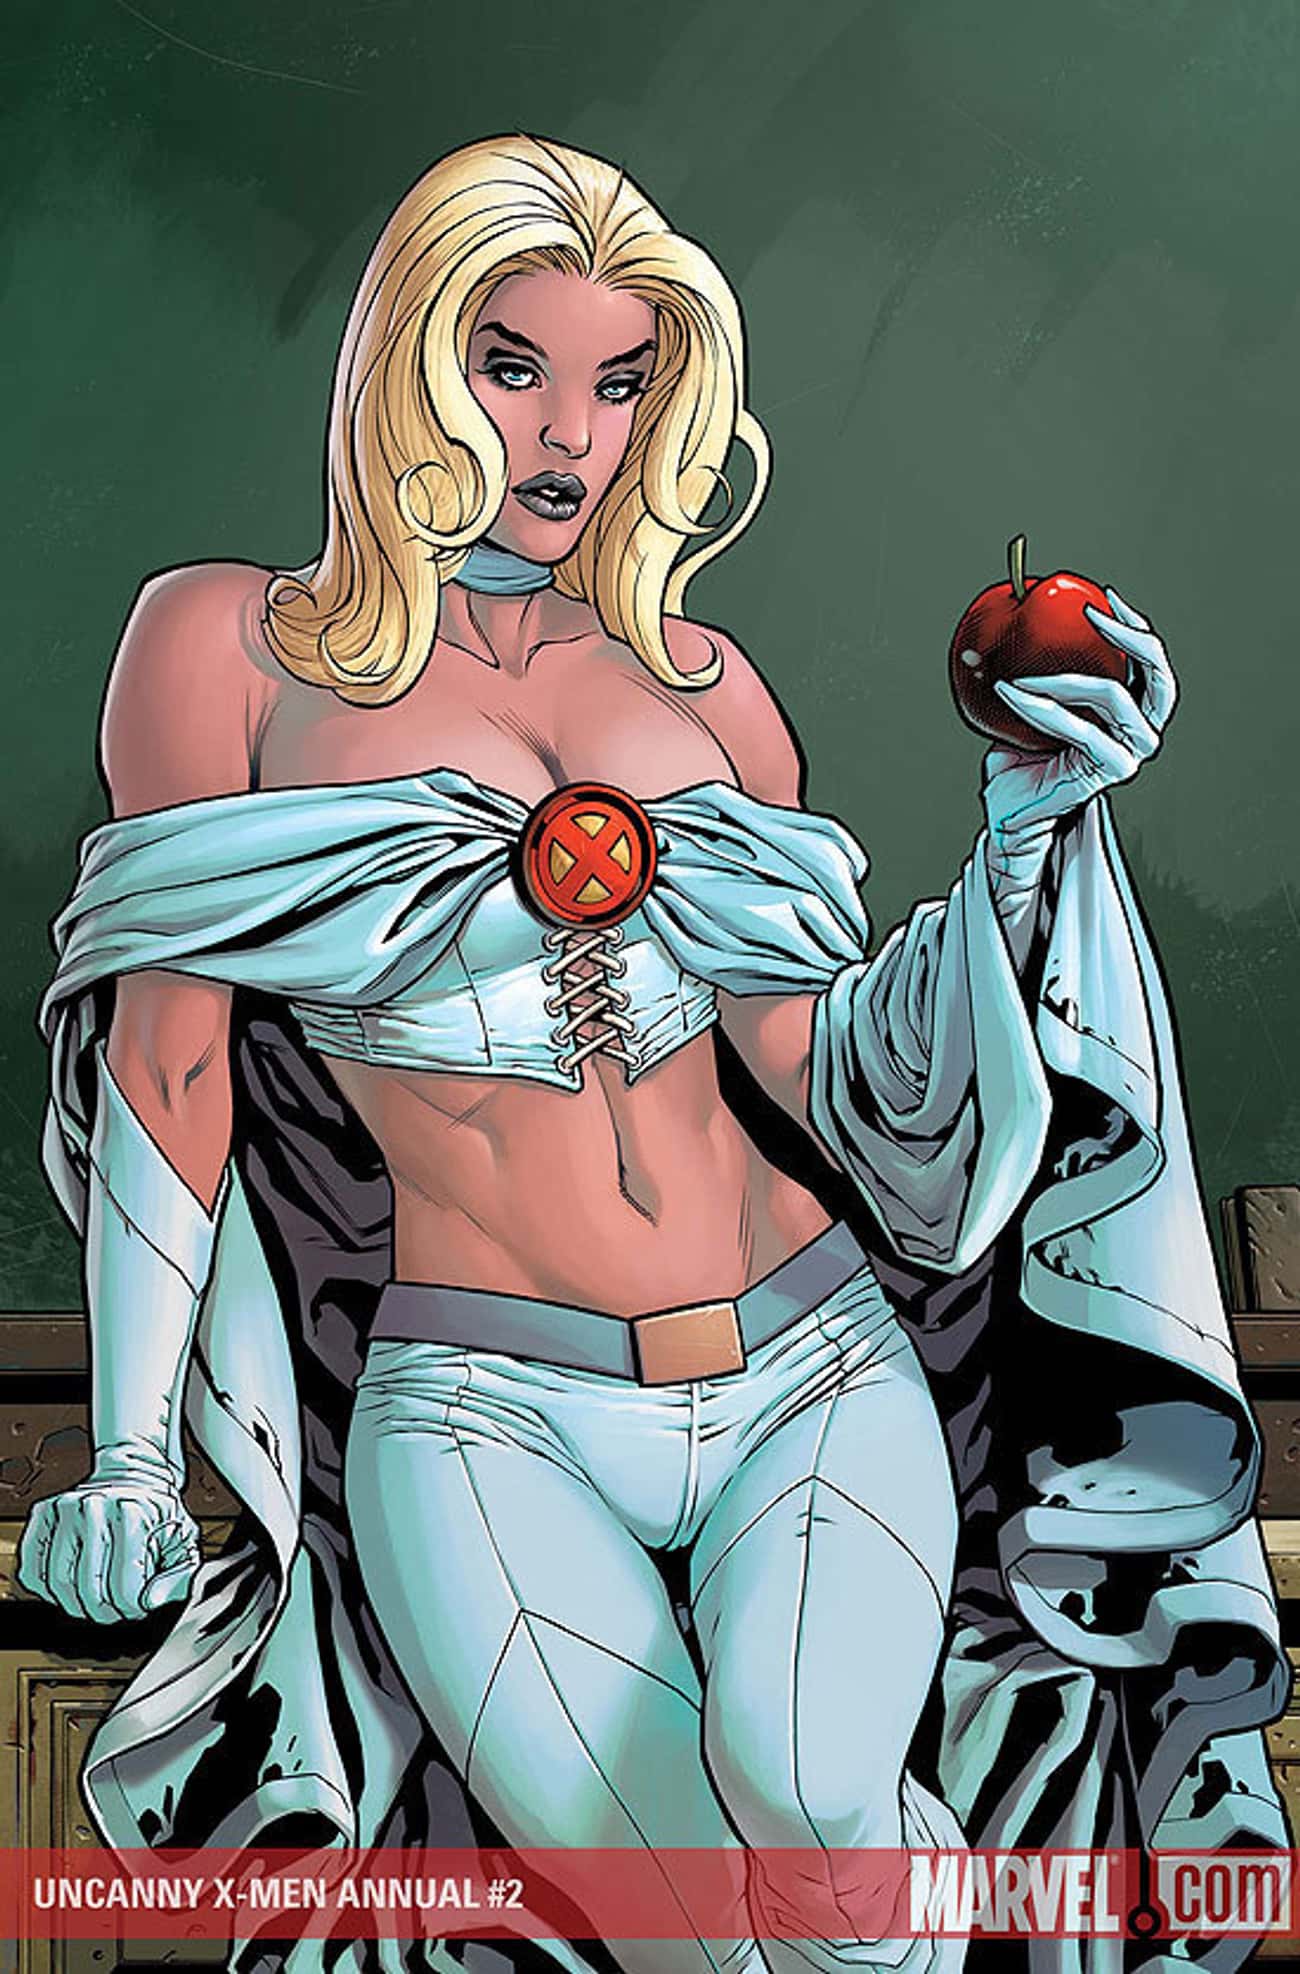 Emma Frost in White Original Suit